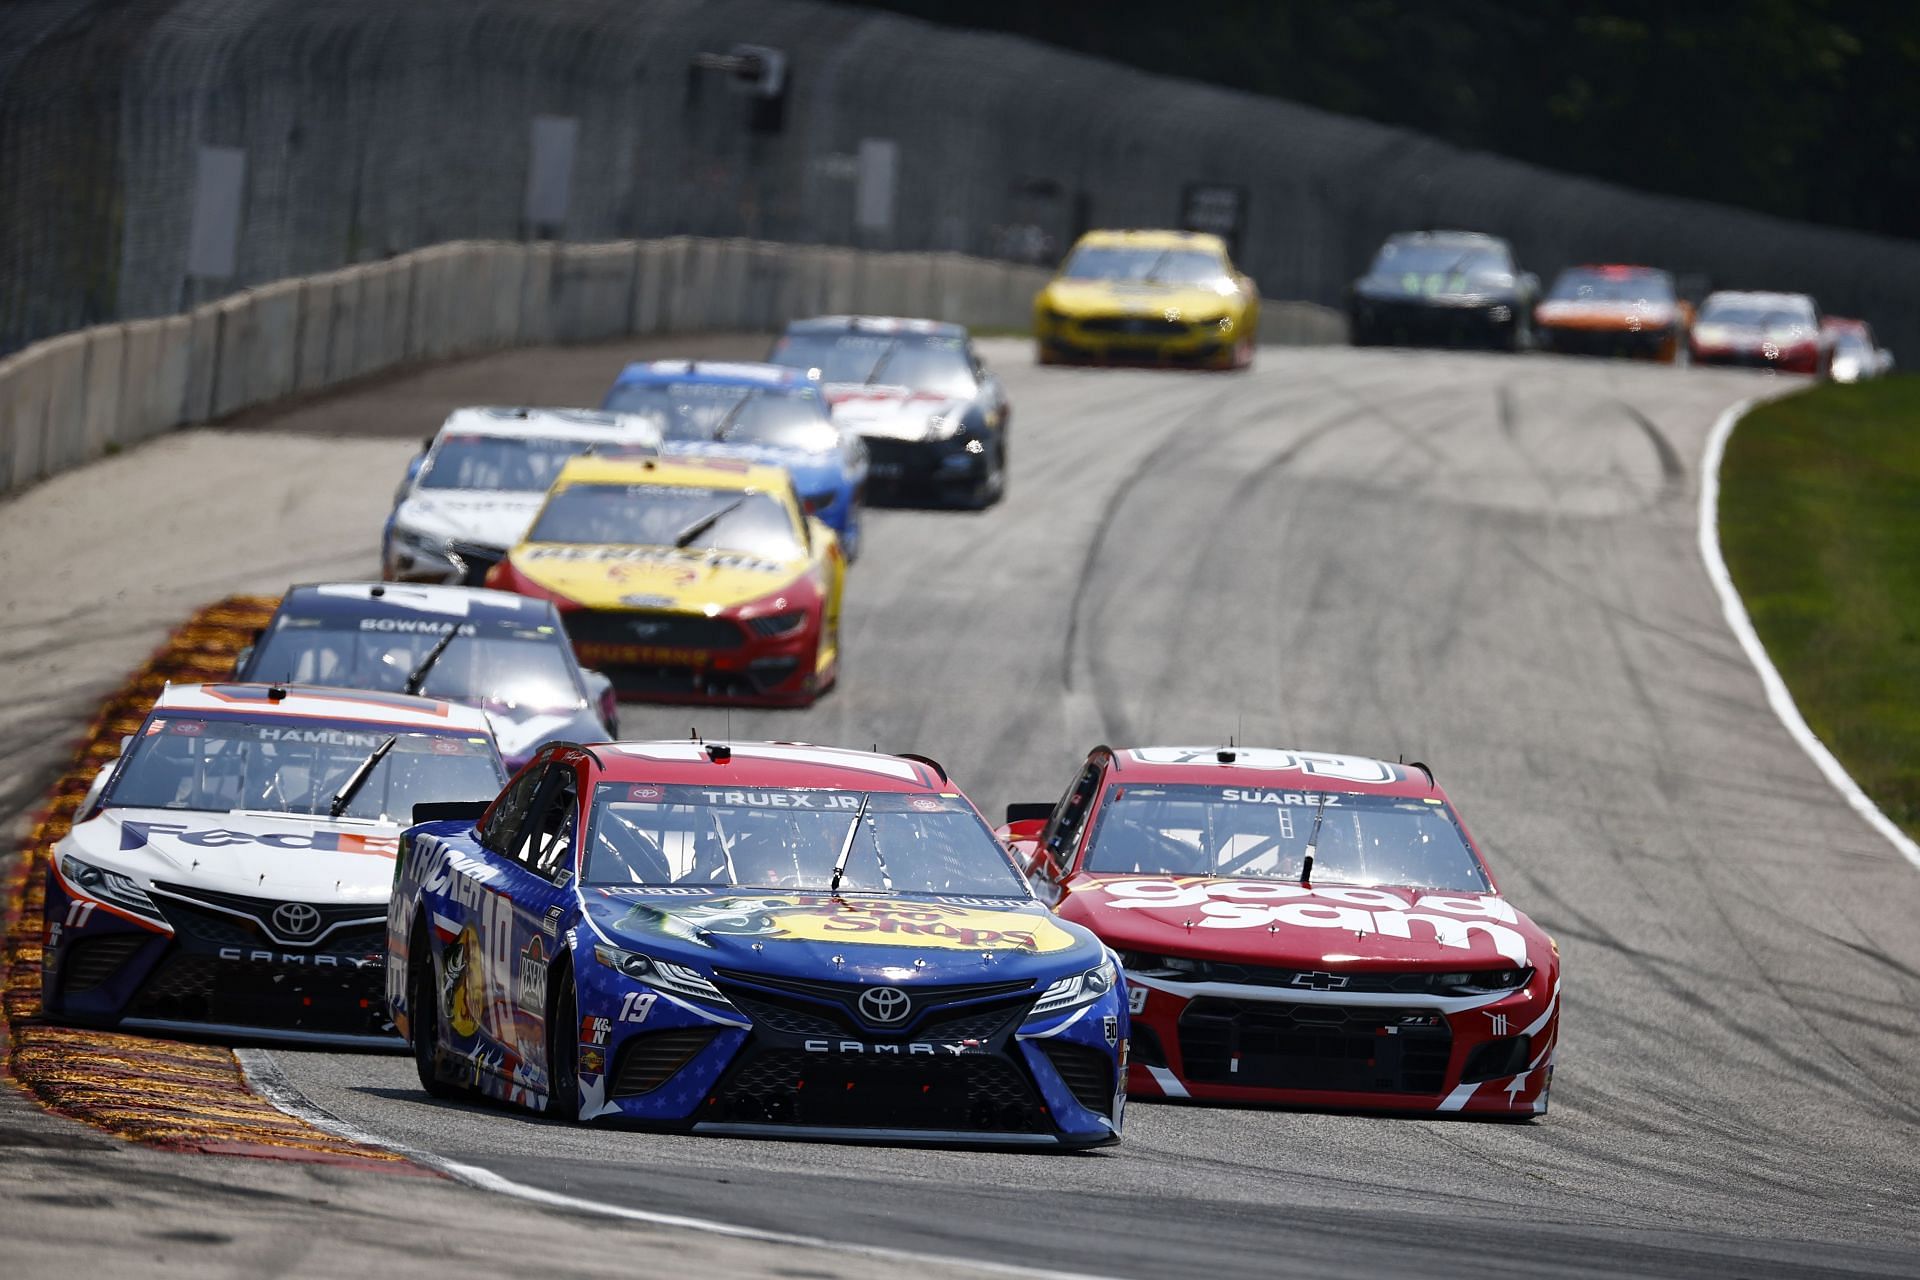 Martin Truex Jr. leads during the 2021 NASCAR Cup Series Jockey Made in America 250 Presented by Kwik Trip at Road America in Elkhart Lake, Wisconsin (Photo by Jared C. Tilton/Getty Images)